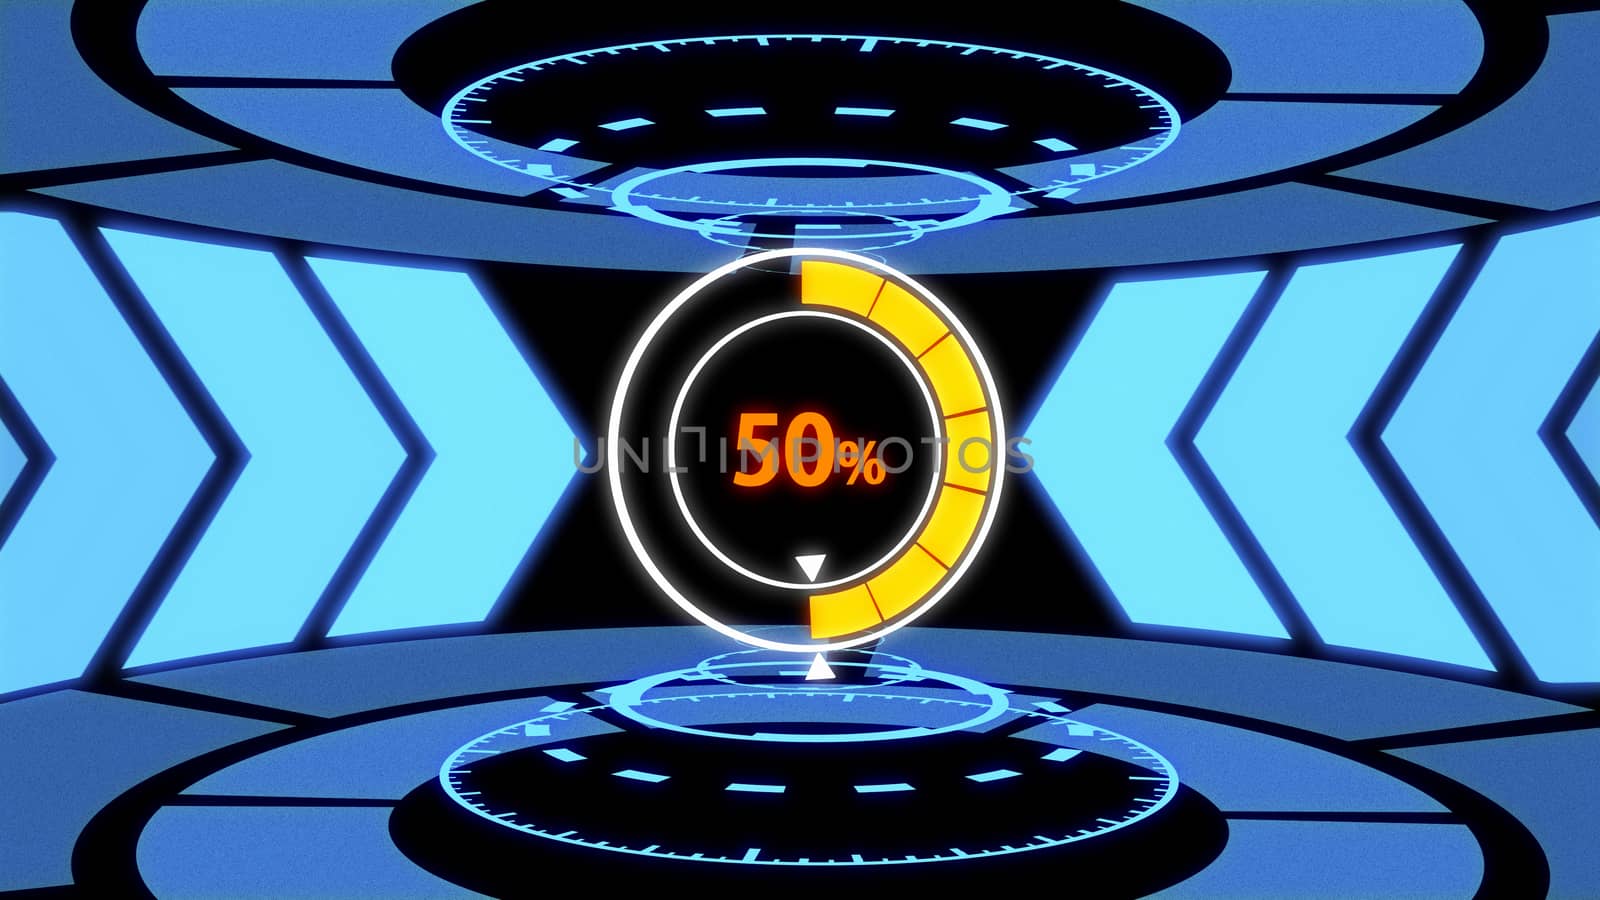 3D Loading screen HUD in Technology Laboratory with Arrow Path Lights, Loading Circle and Digital Circles (50% loading) by ariya23156